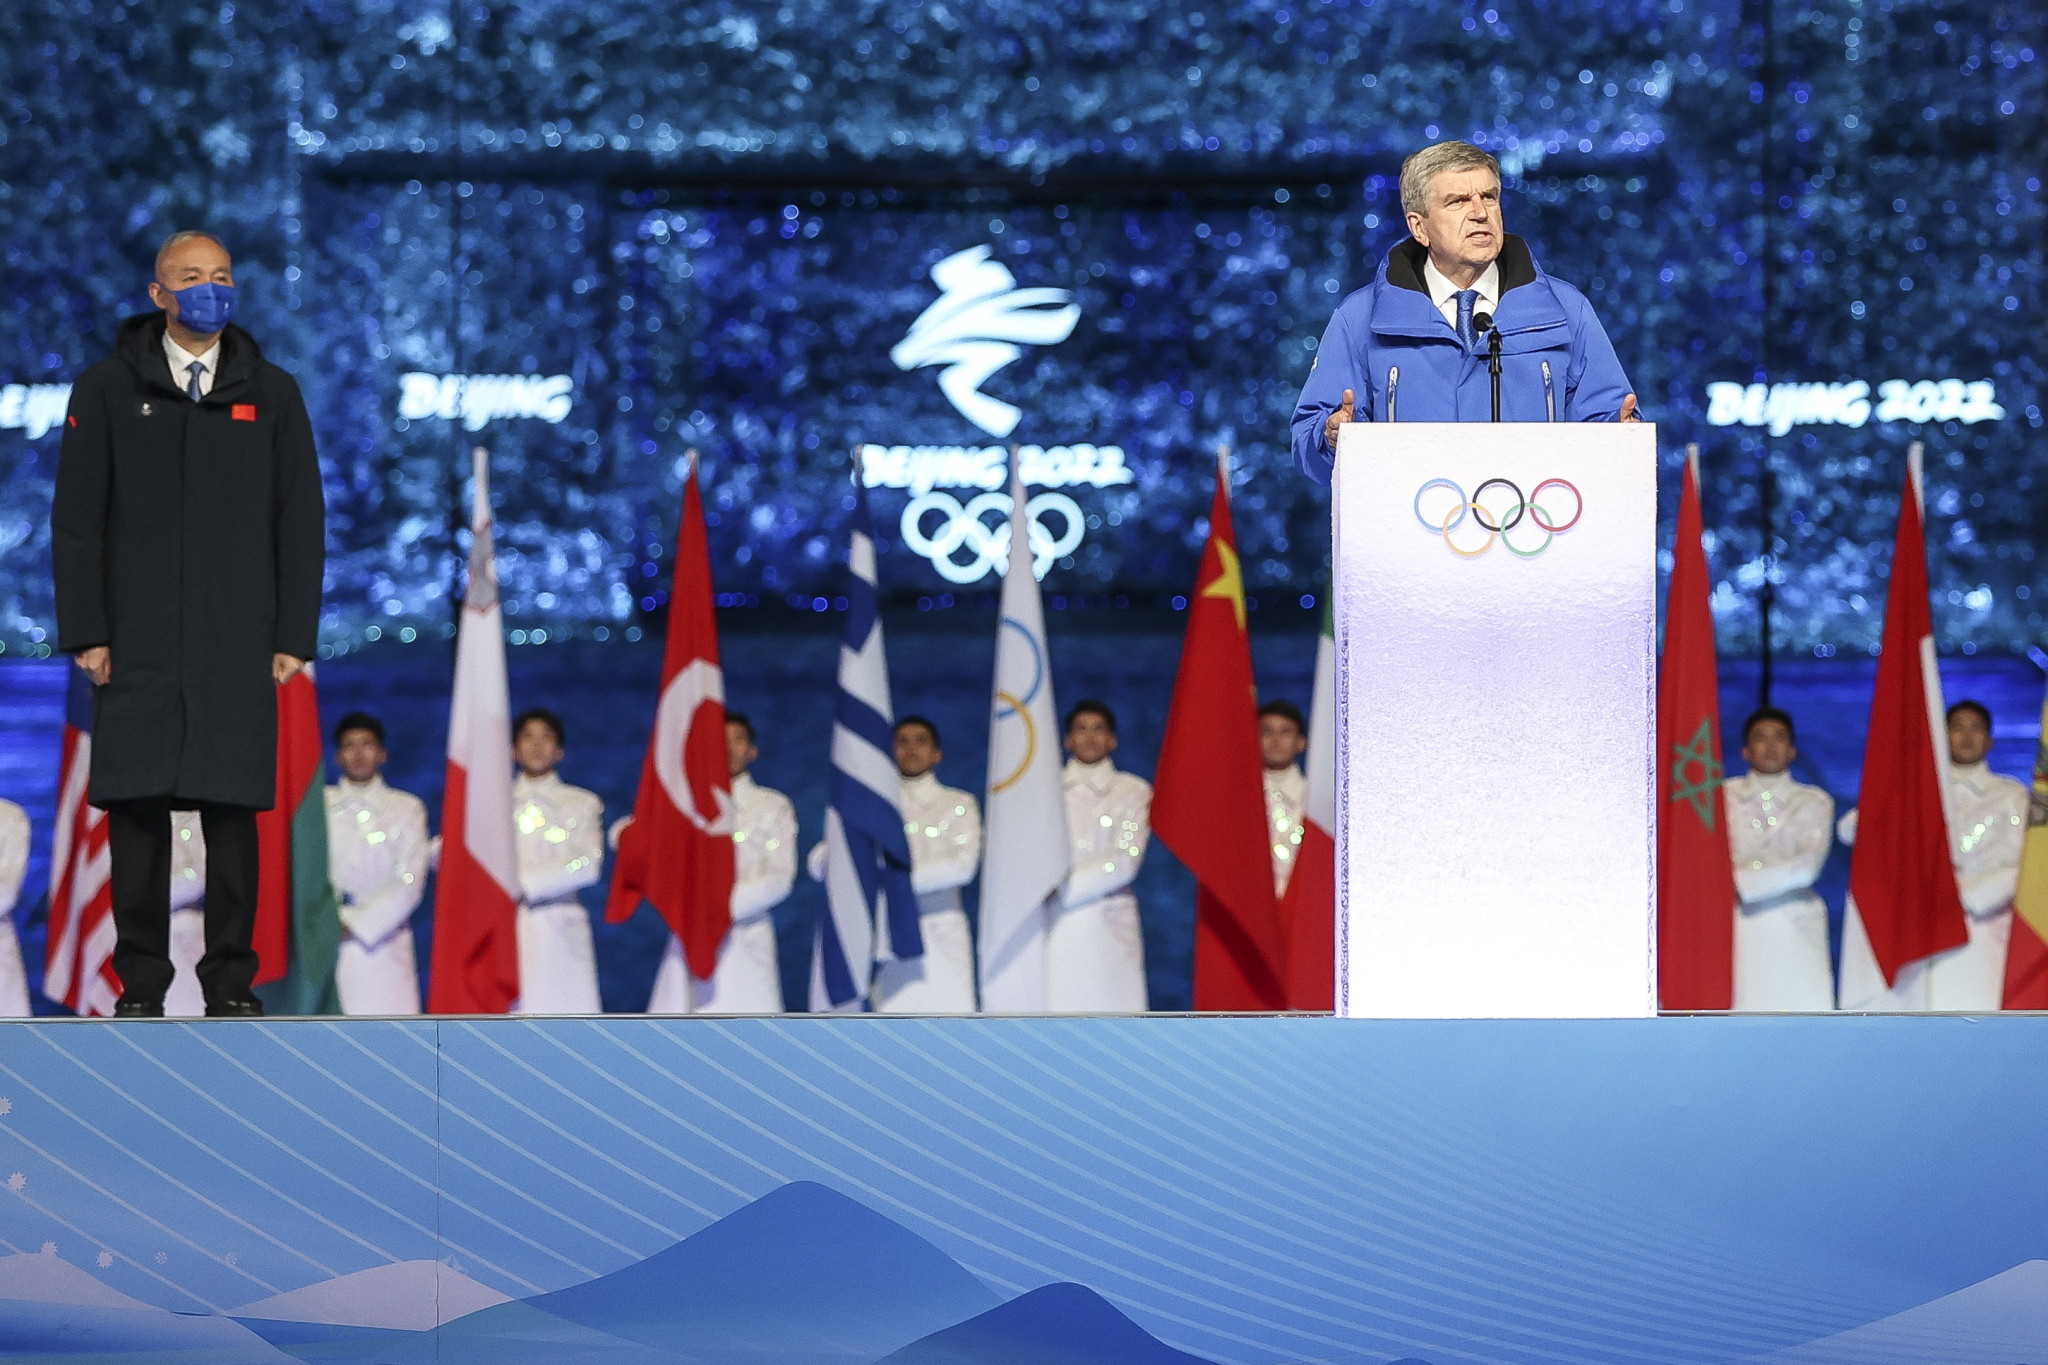 IOC President Thomas Bach declared that China had become a 